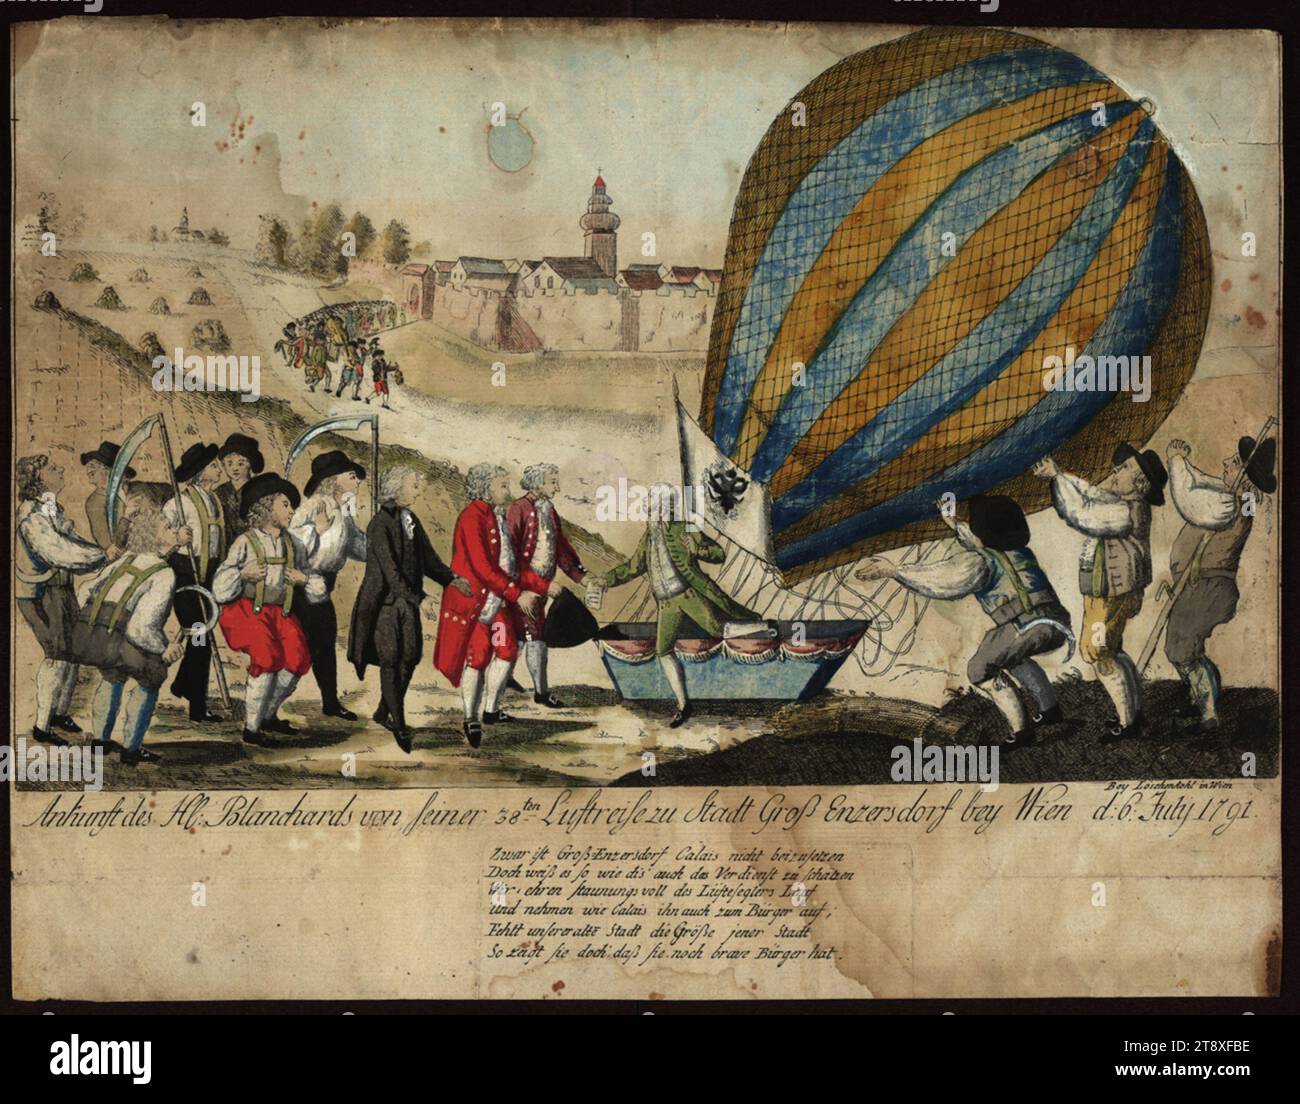 Jean-Pierre Blanchard's arrival from his 38th air journey in Großenzersdorf near Vienna, Johann Hieronymus Löschenkohl (1753-1807), publishing house, 1791, paper, colored, copperplate engraving, sheet size 26×33, 5 cm, Inscription, r. u.: Bey Löschenkohl in Vienna; Mi. u.: Arrival of H: Blanchard from his 38th air journey to town Groß Enzersdorf bey Wien d: 6: July 1791. Groß Enzersdorf is not to be compared with Calais, but it appreciates the merit as well as dis', We honor with astonishment the run of the aeronaut, And like Calais also accept him as a citizen Stock Photo